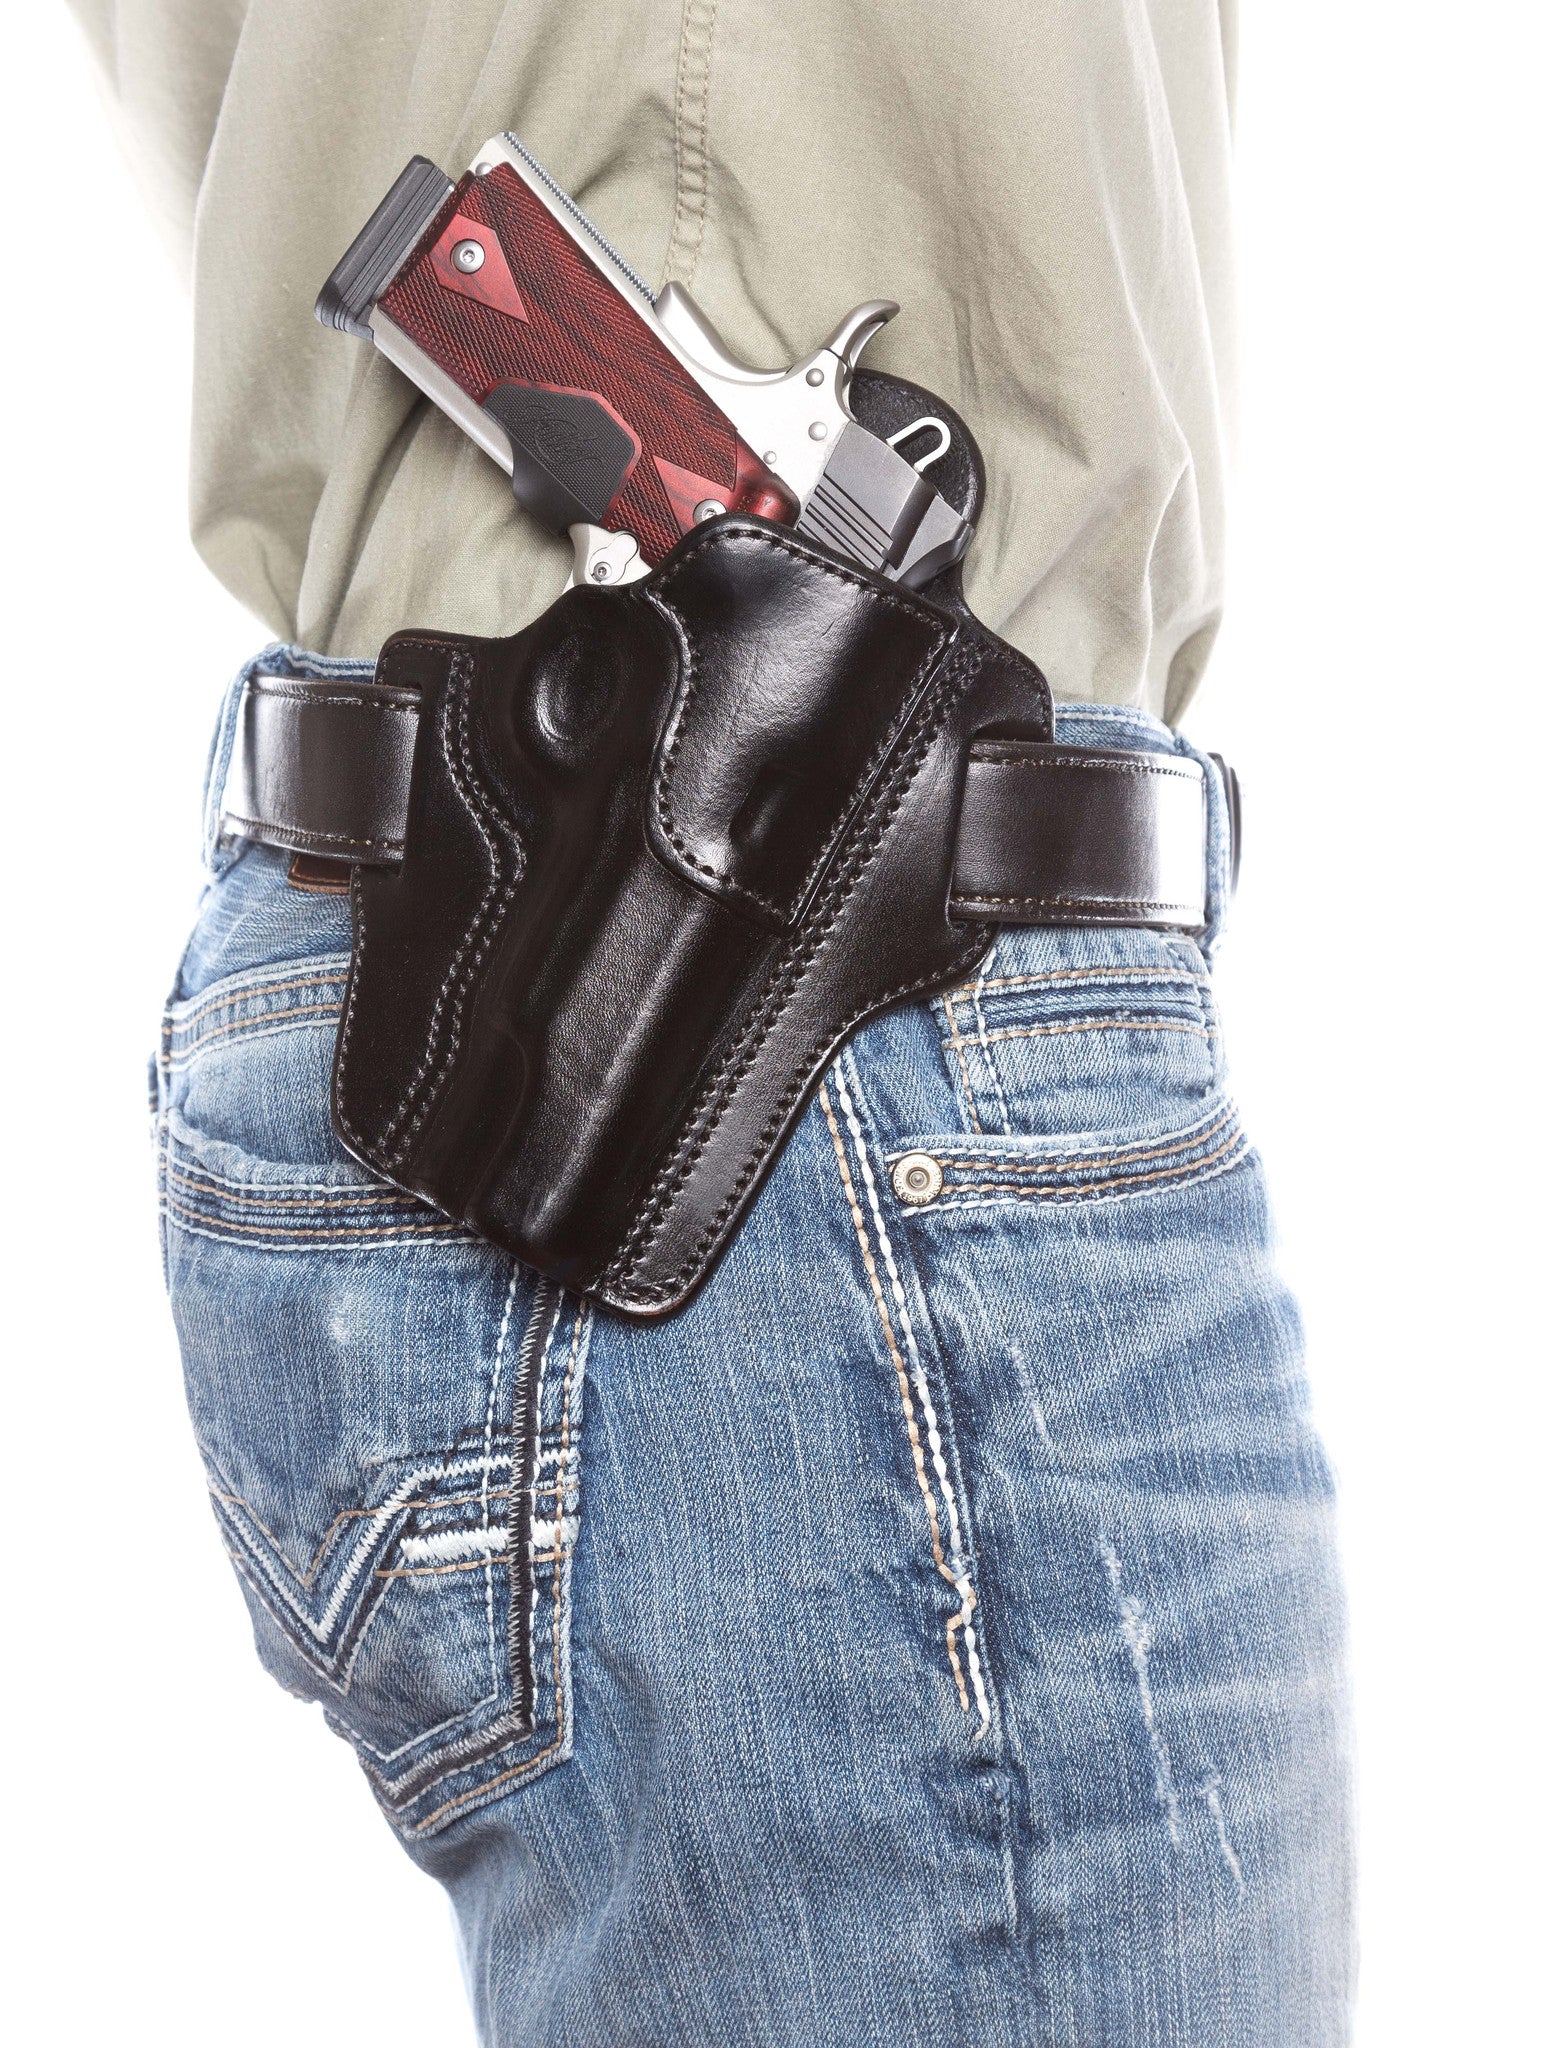 Guides Choice™ Leather Chest Holster, the ULTIMATE outdoor gun holster, Diamond D Custom Leather